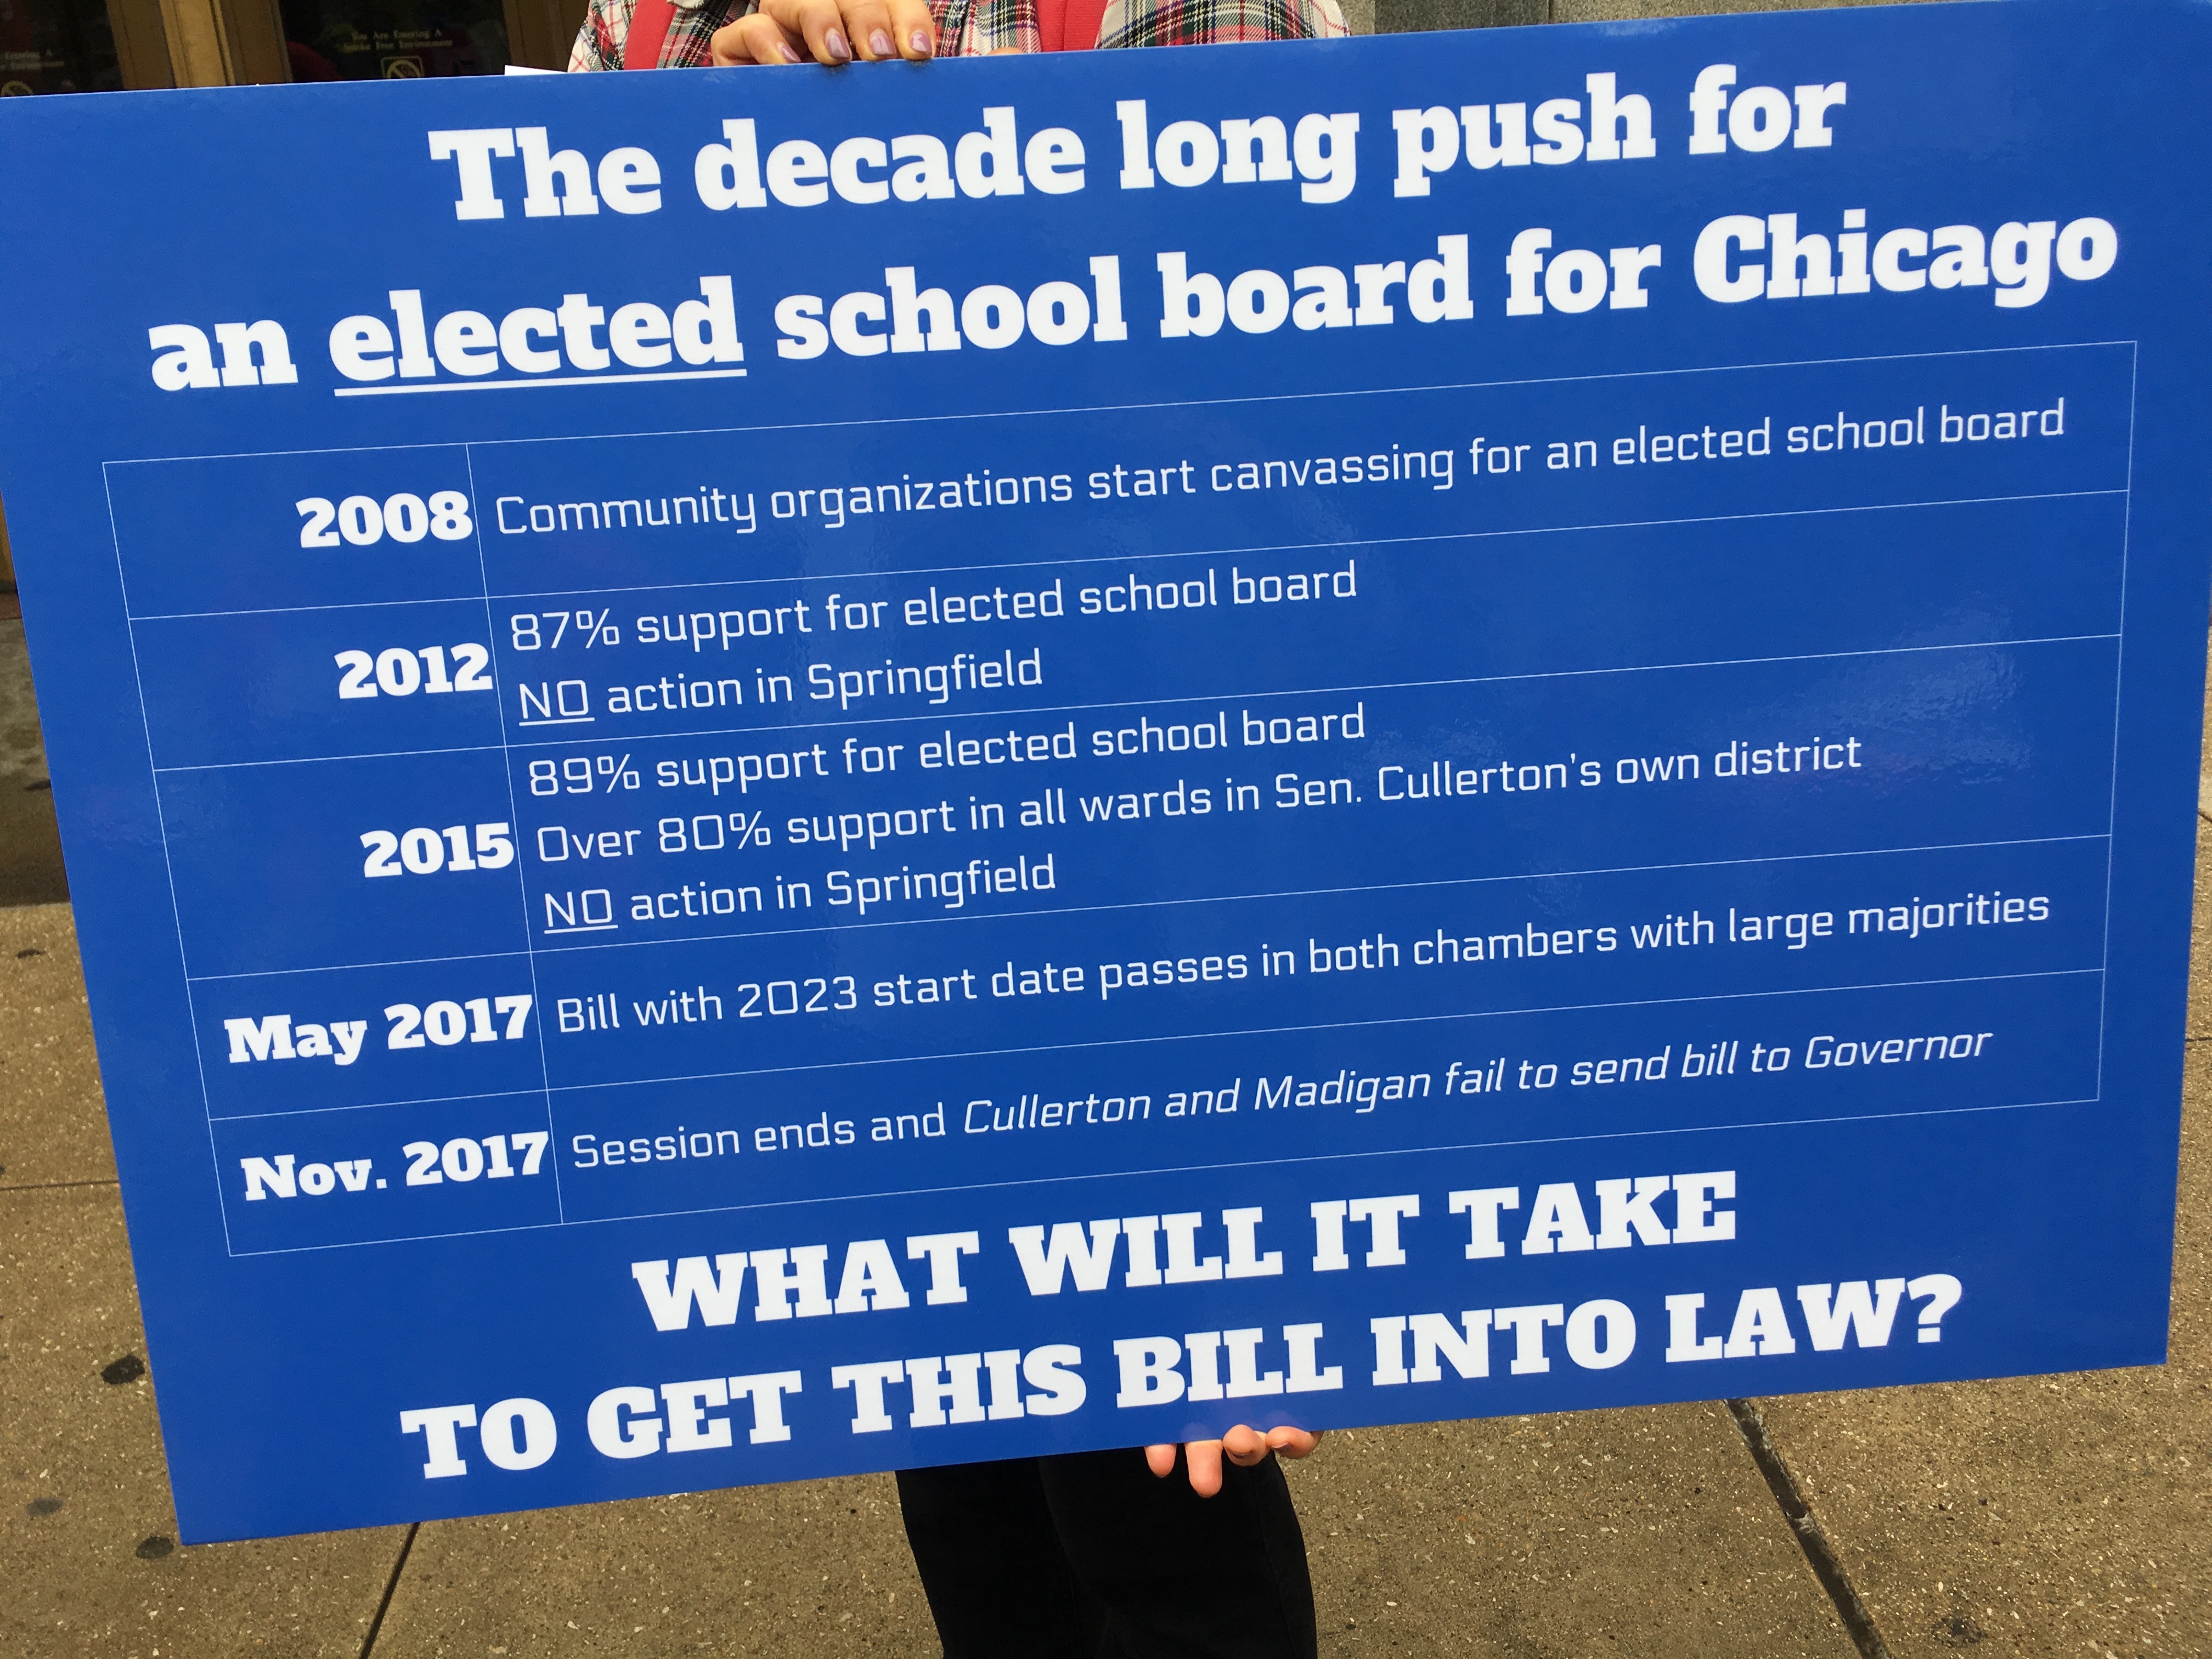 A sign advocating for an elected school board in Chicago reads, “The decade long push for an elected school board in Chicago,” with events from five dates, and “What will it take to get this bill into law.”